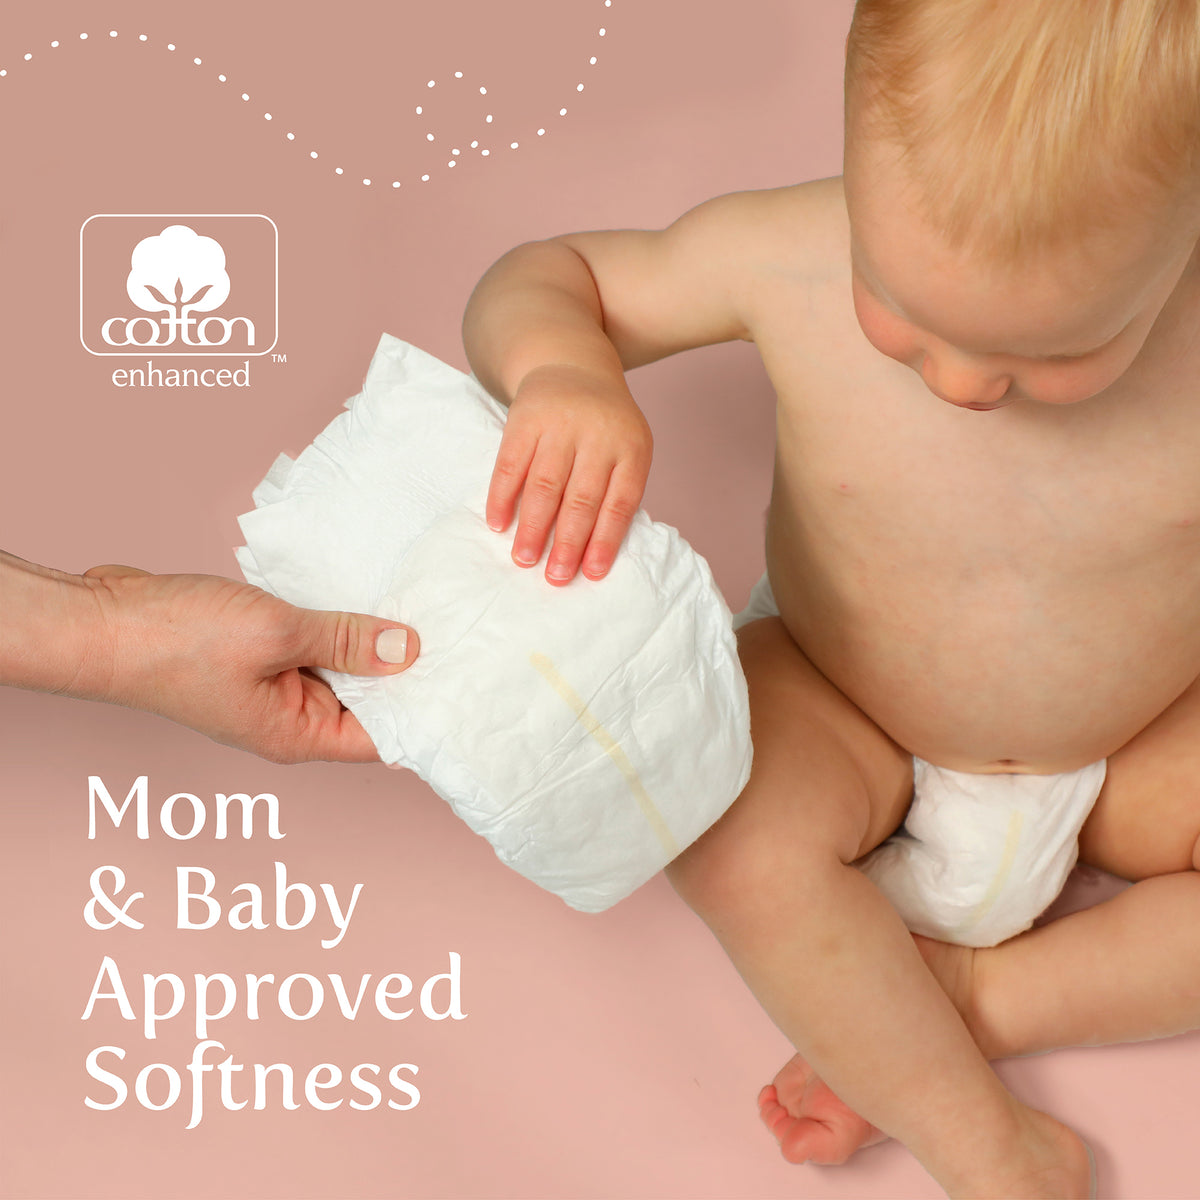 Size 5 Diapers - Order Online & Save